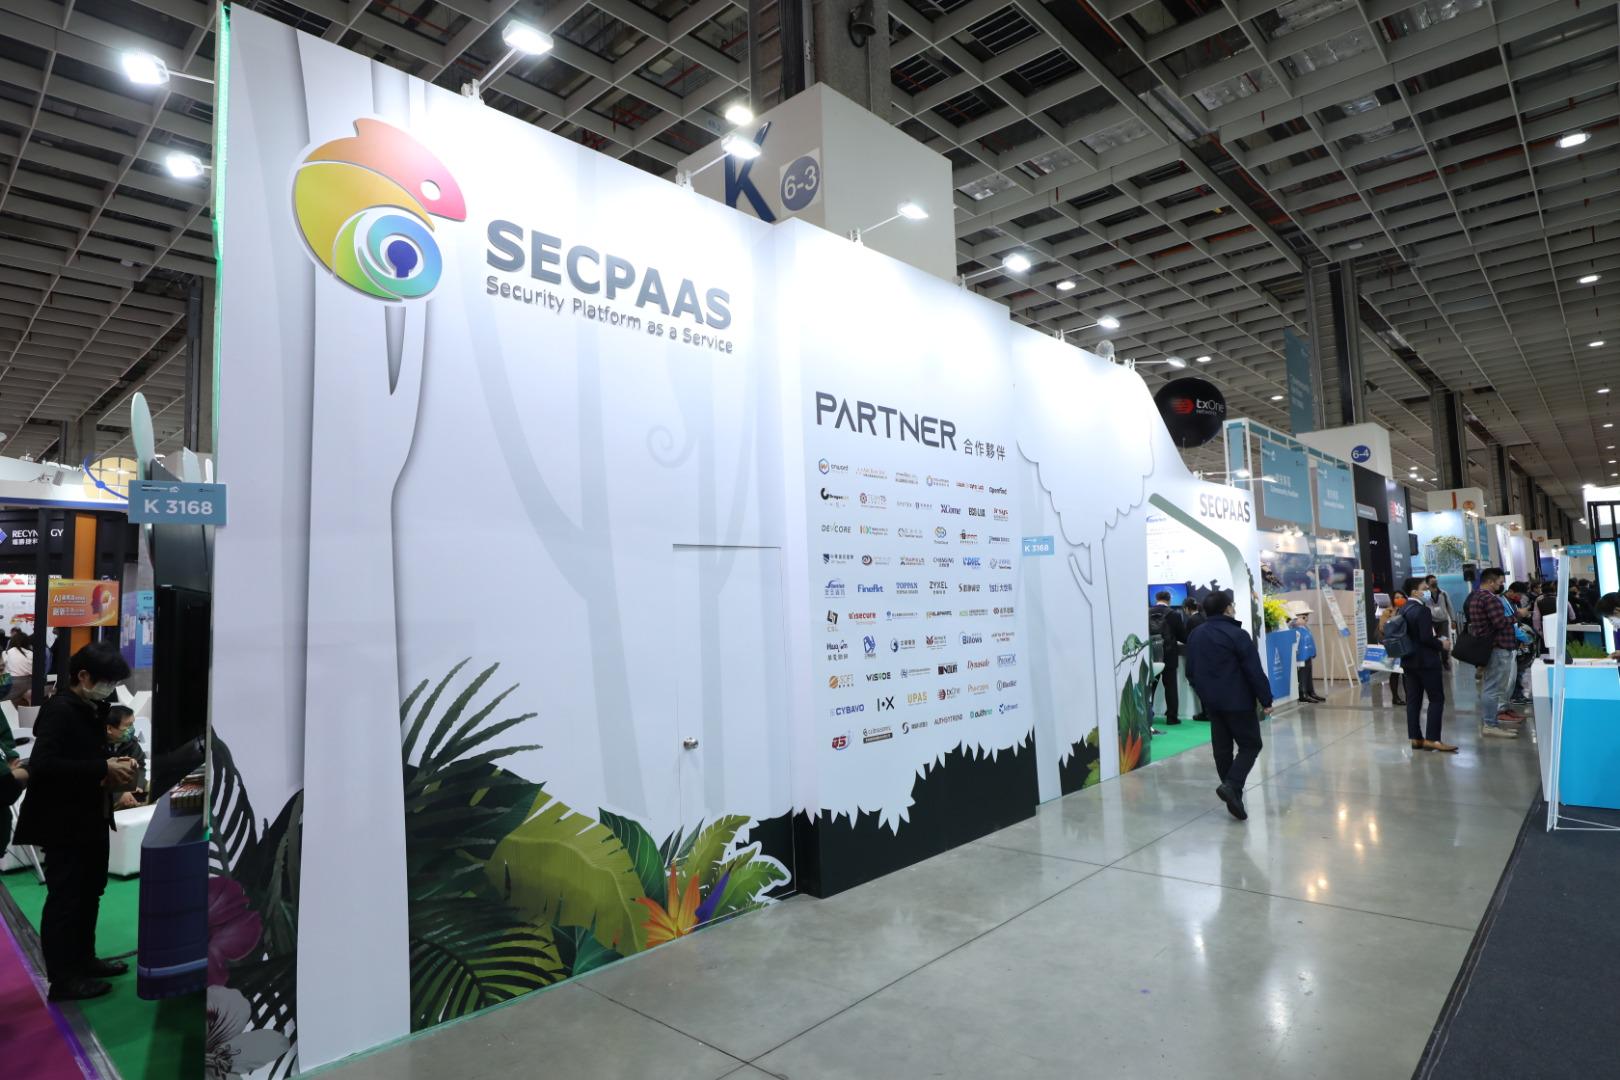 Wang Yi Design, ITRI, Taiwan International Semiconductor Exhibition, ITRI, SEMICON Taiwan 2021, SECPAAS, Information Security Integrated Service Platform, Exhibition Design, Exhibition Booth Design, Booth Design, Booth Decoration